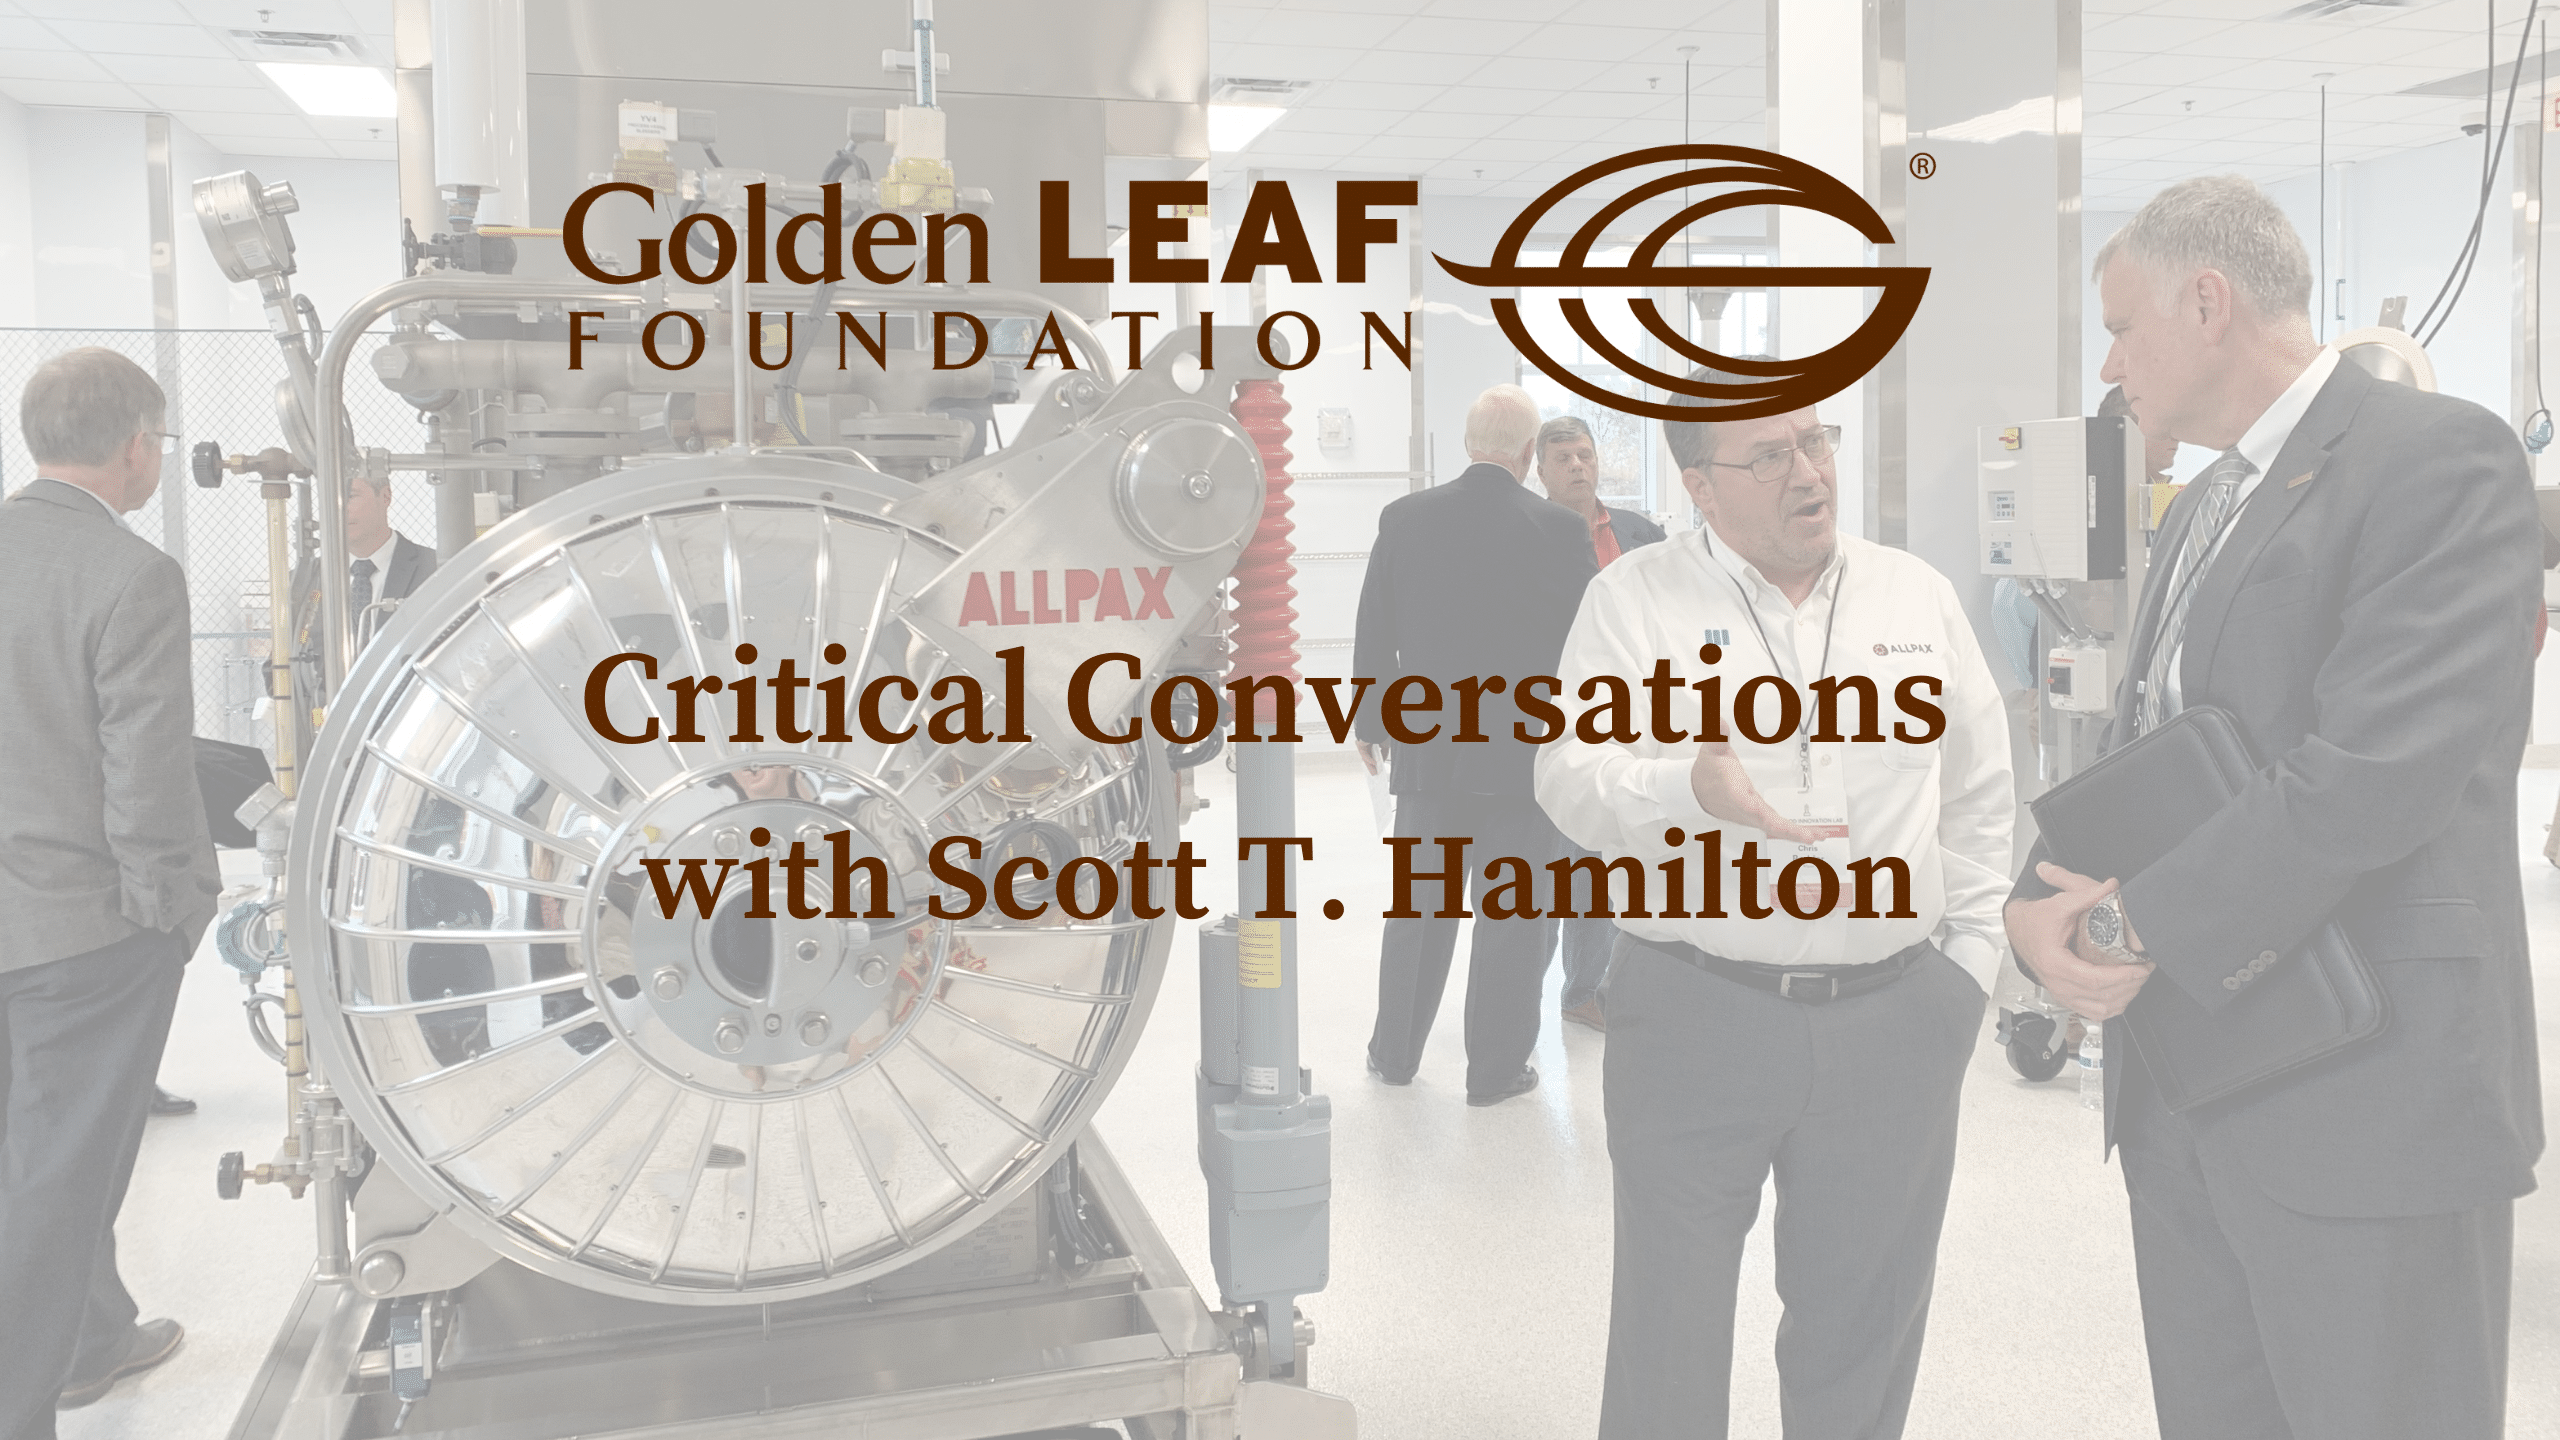 Critical Conversations with Scott T. Hamilton featuring Richard Linton, Dean of the College of Agriculture and Life Sciences at N.C. State